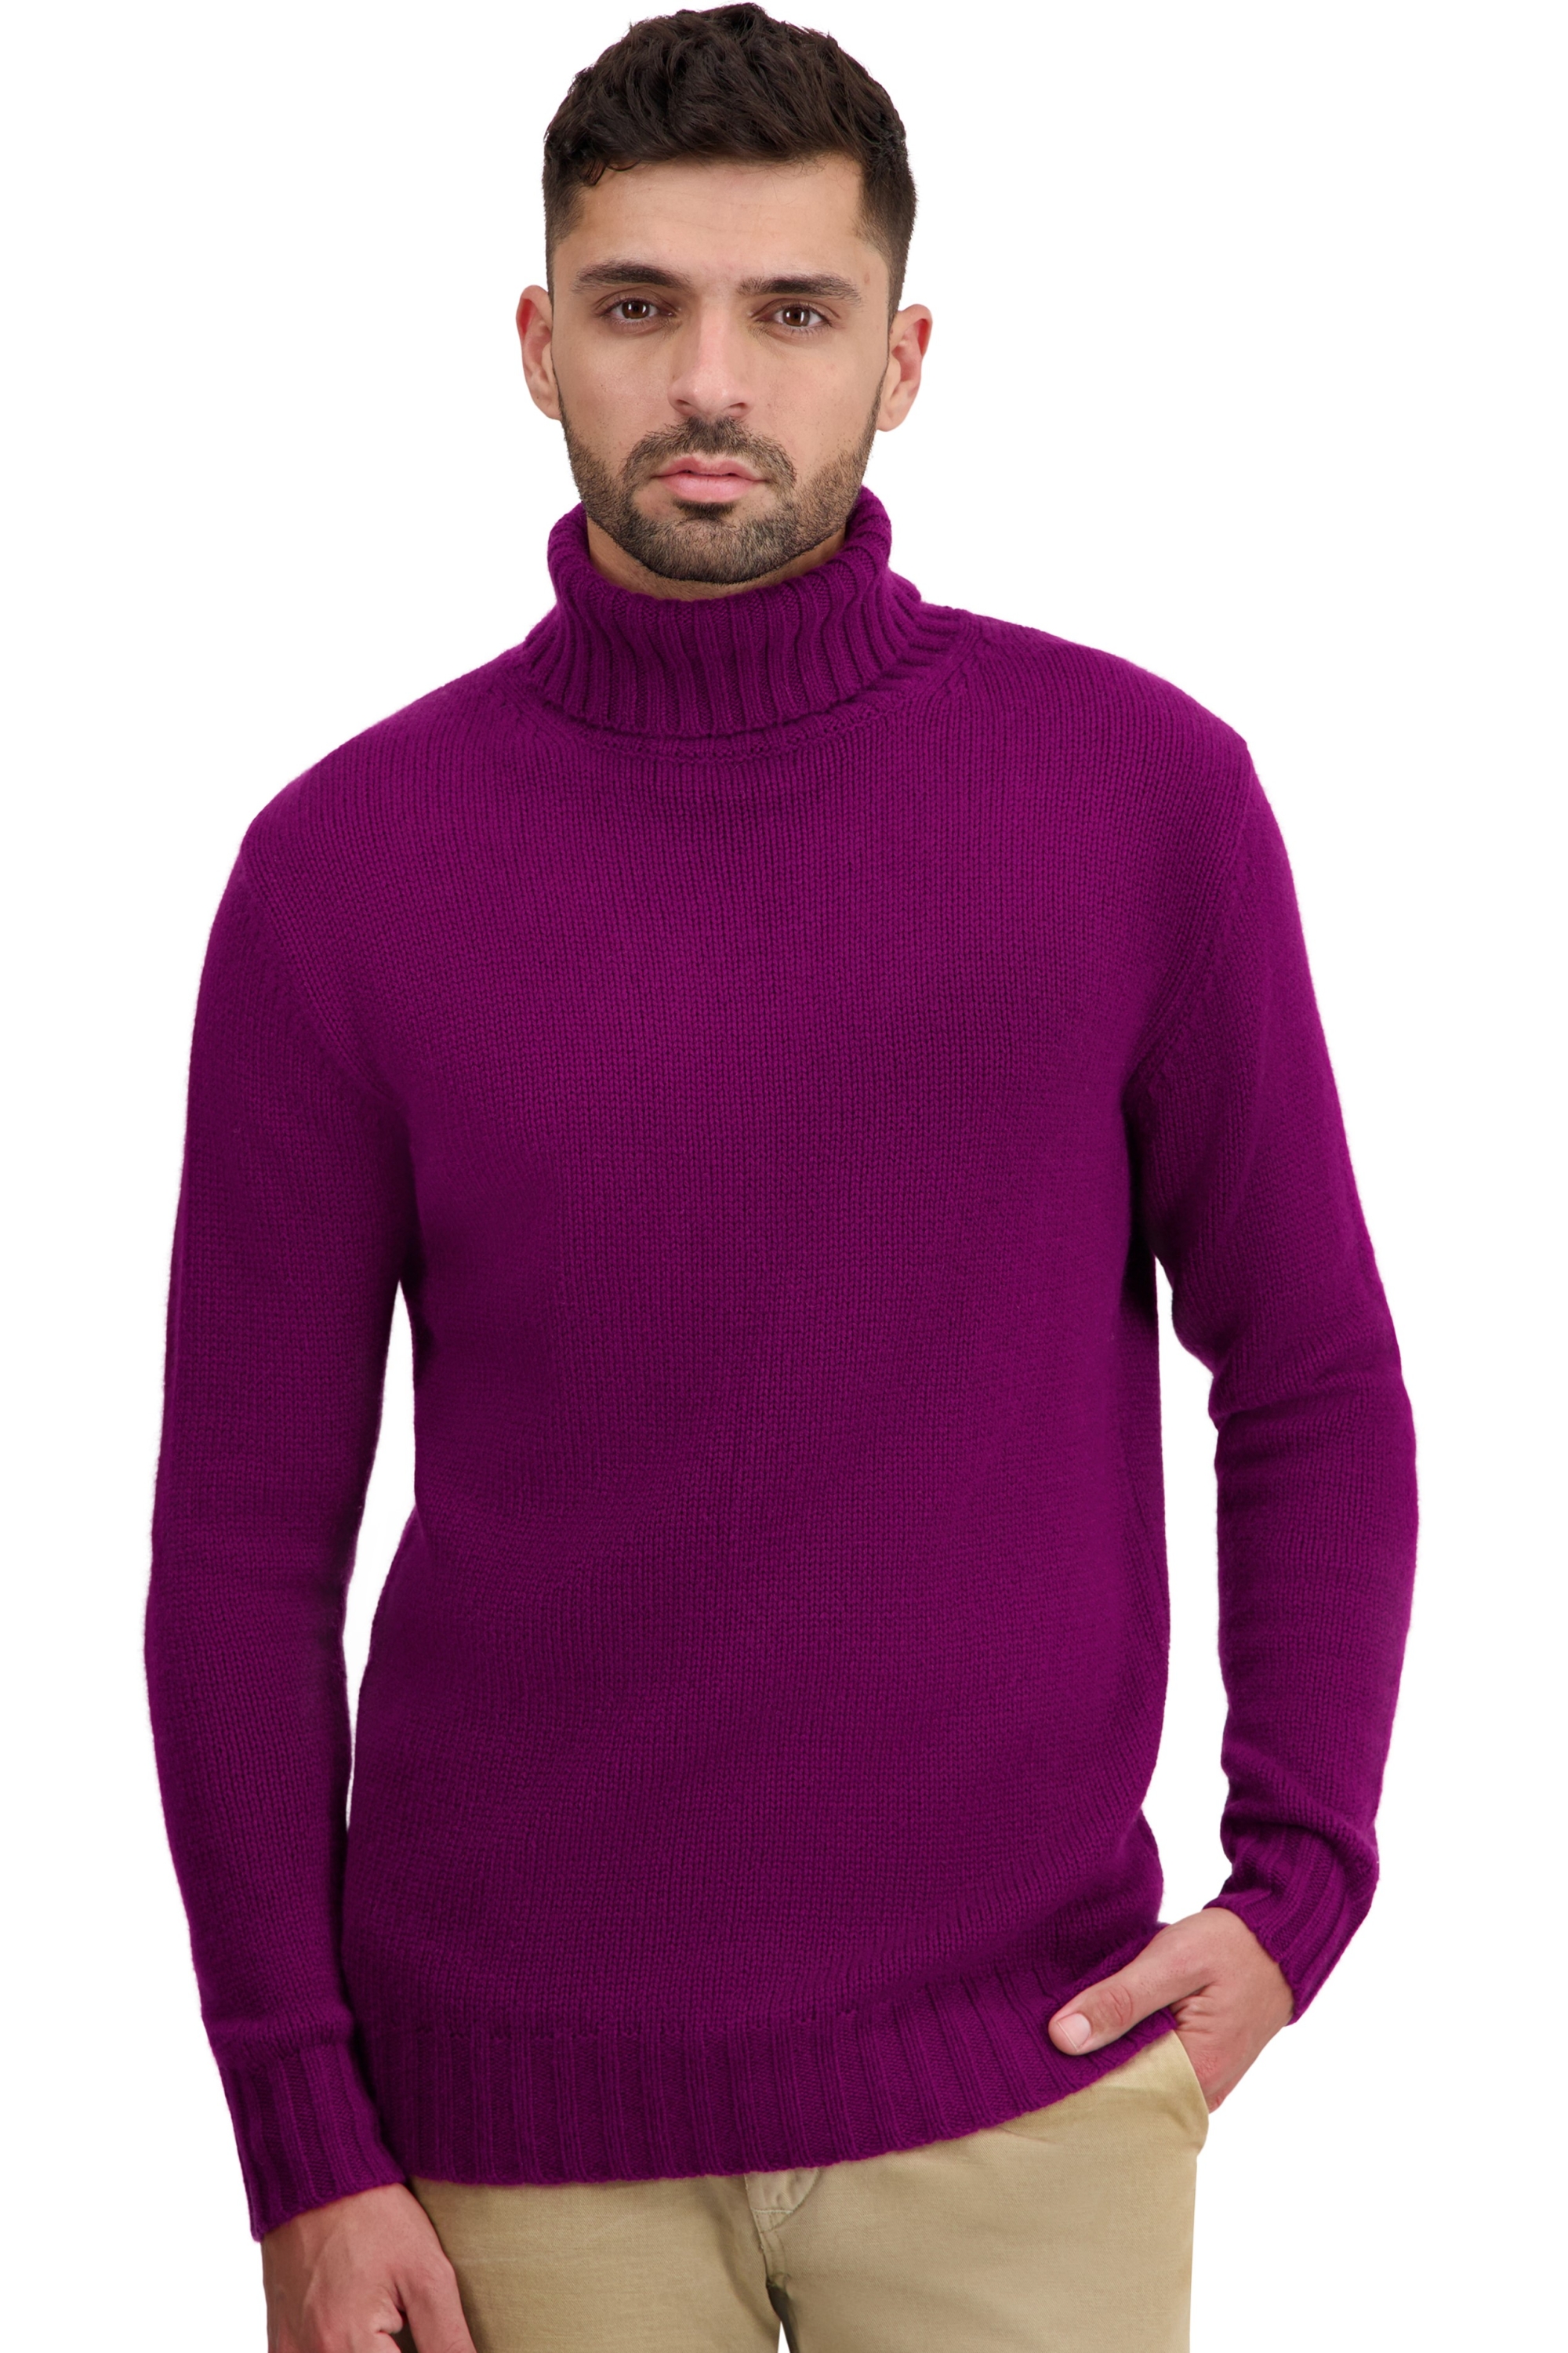 Cashmere men basic sweaters at low prices tobago first rich claret m